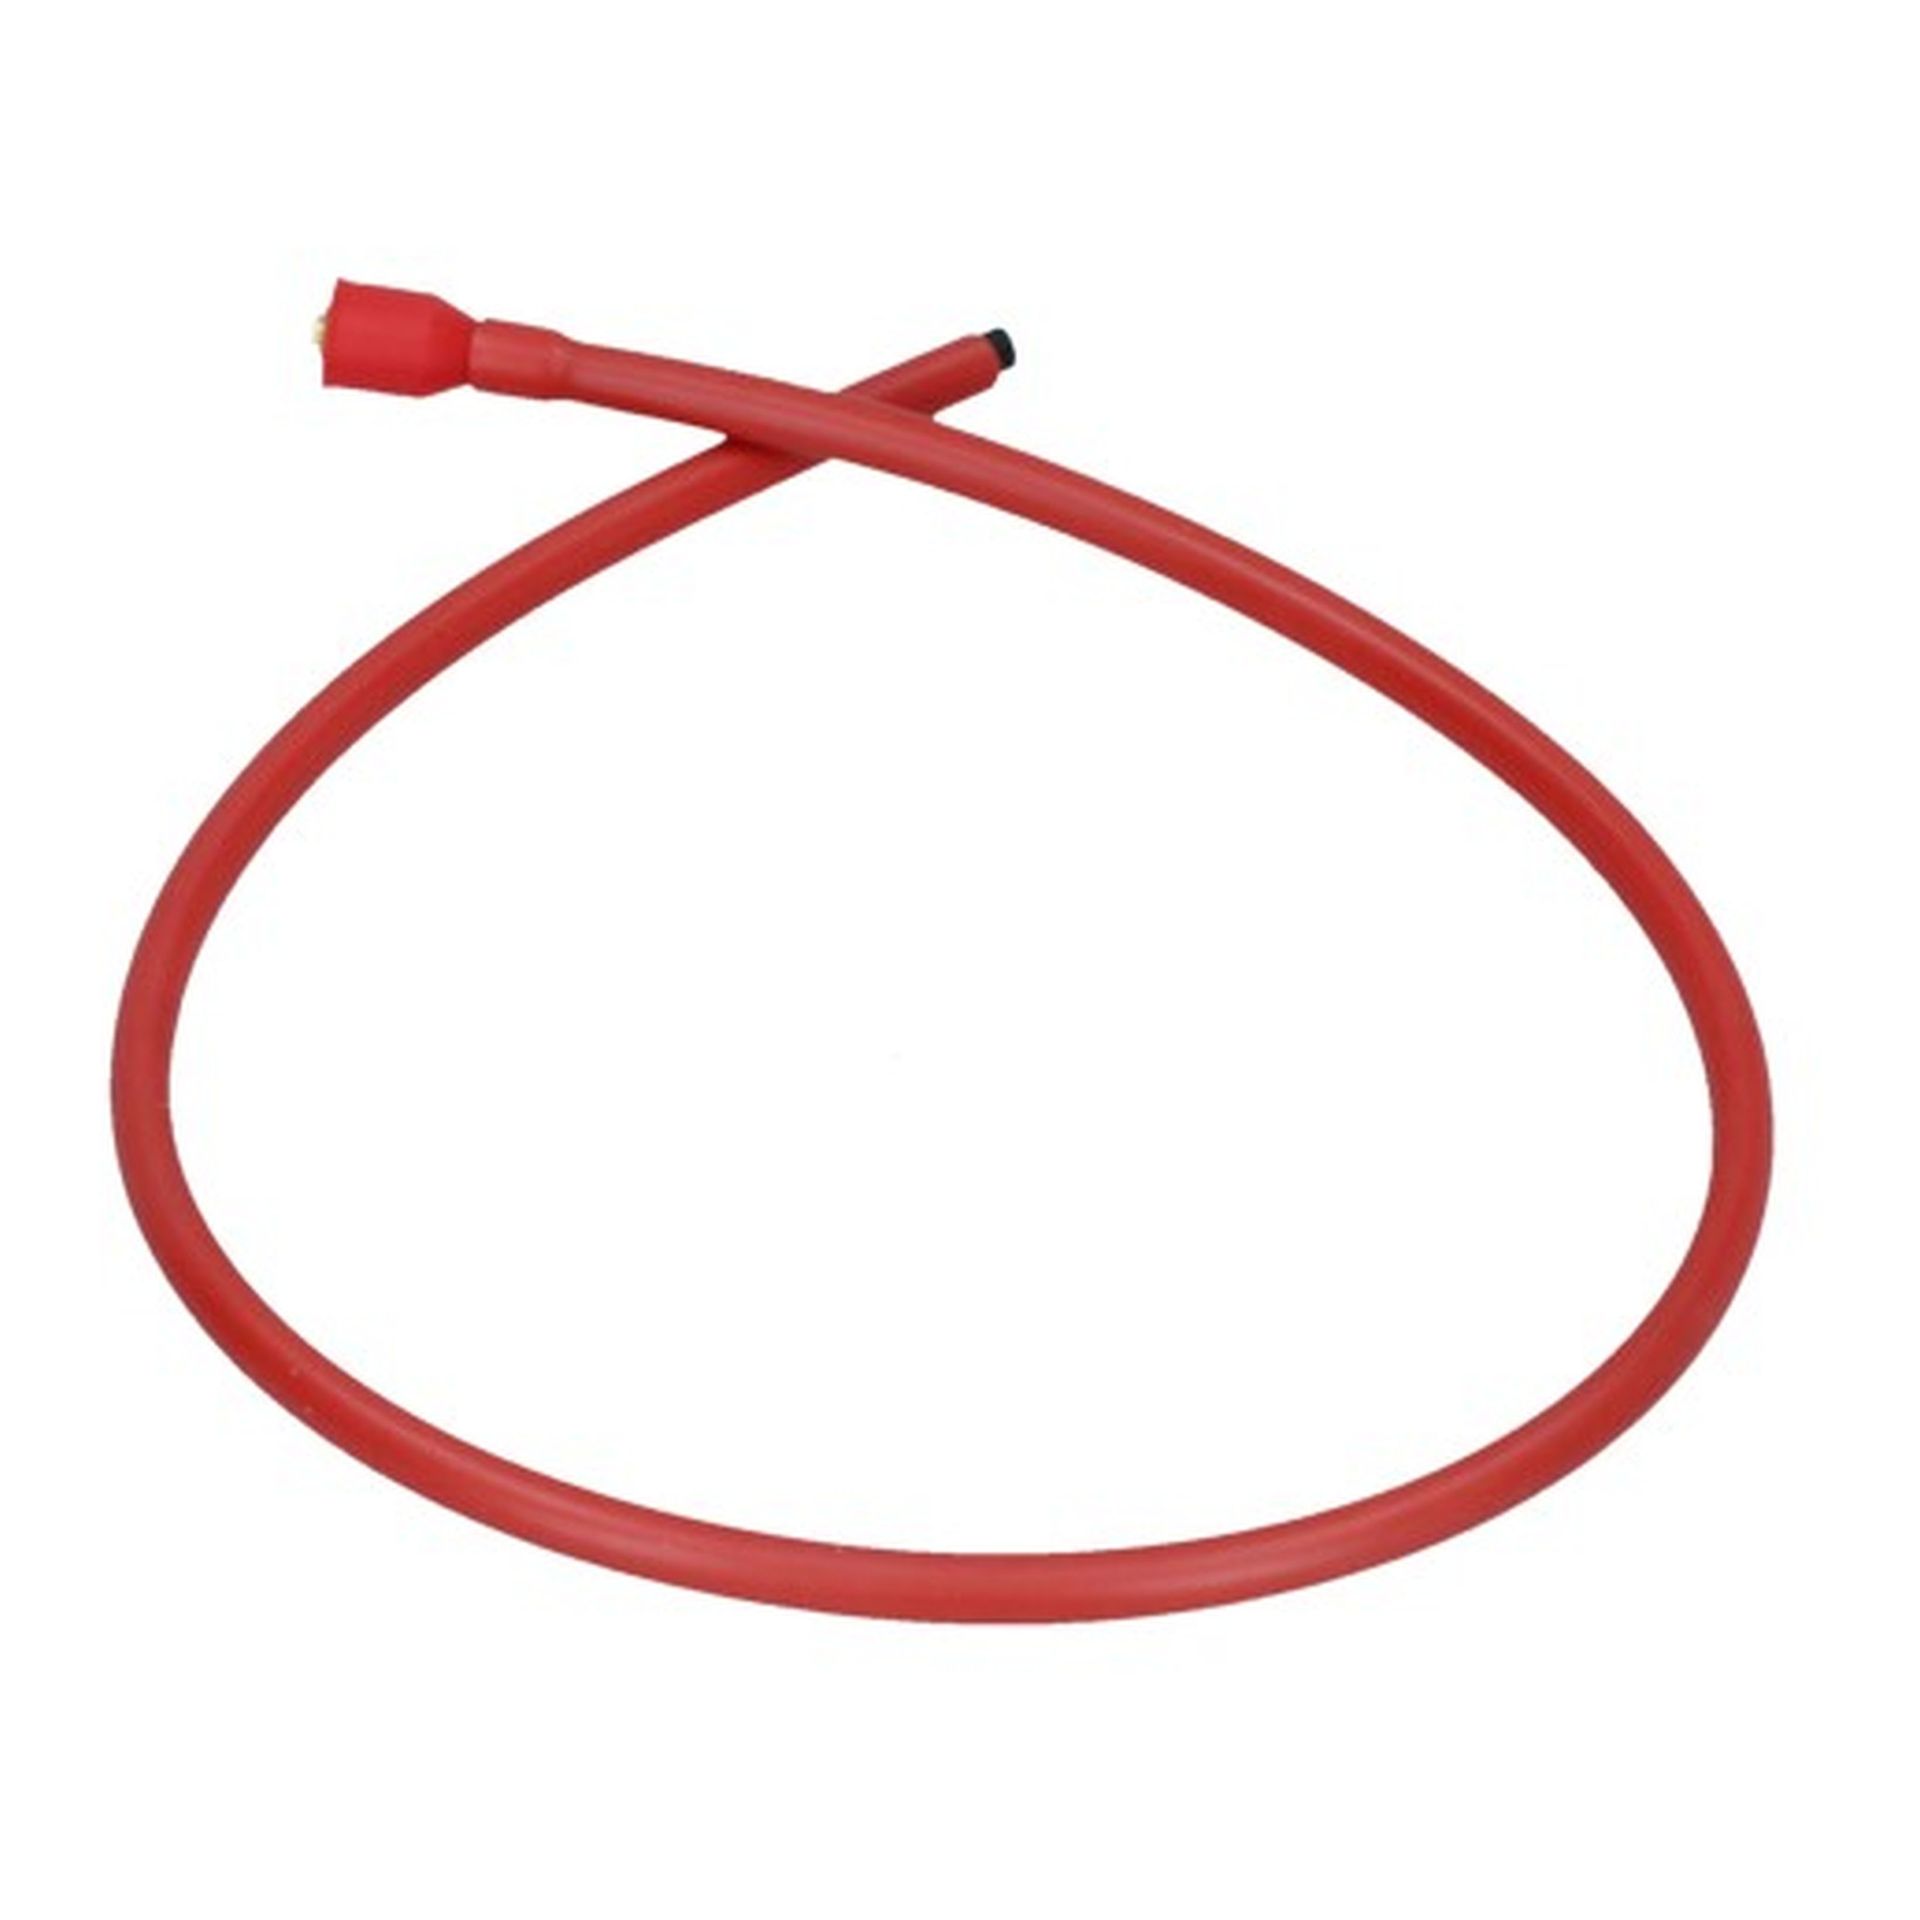 HT Coil Lead Mondial ( Red ) Right